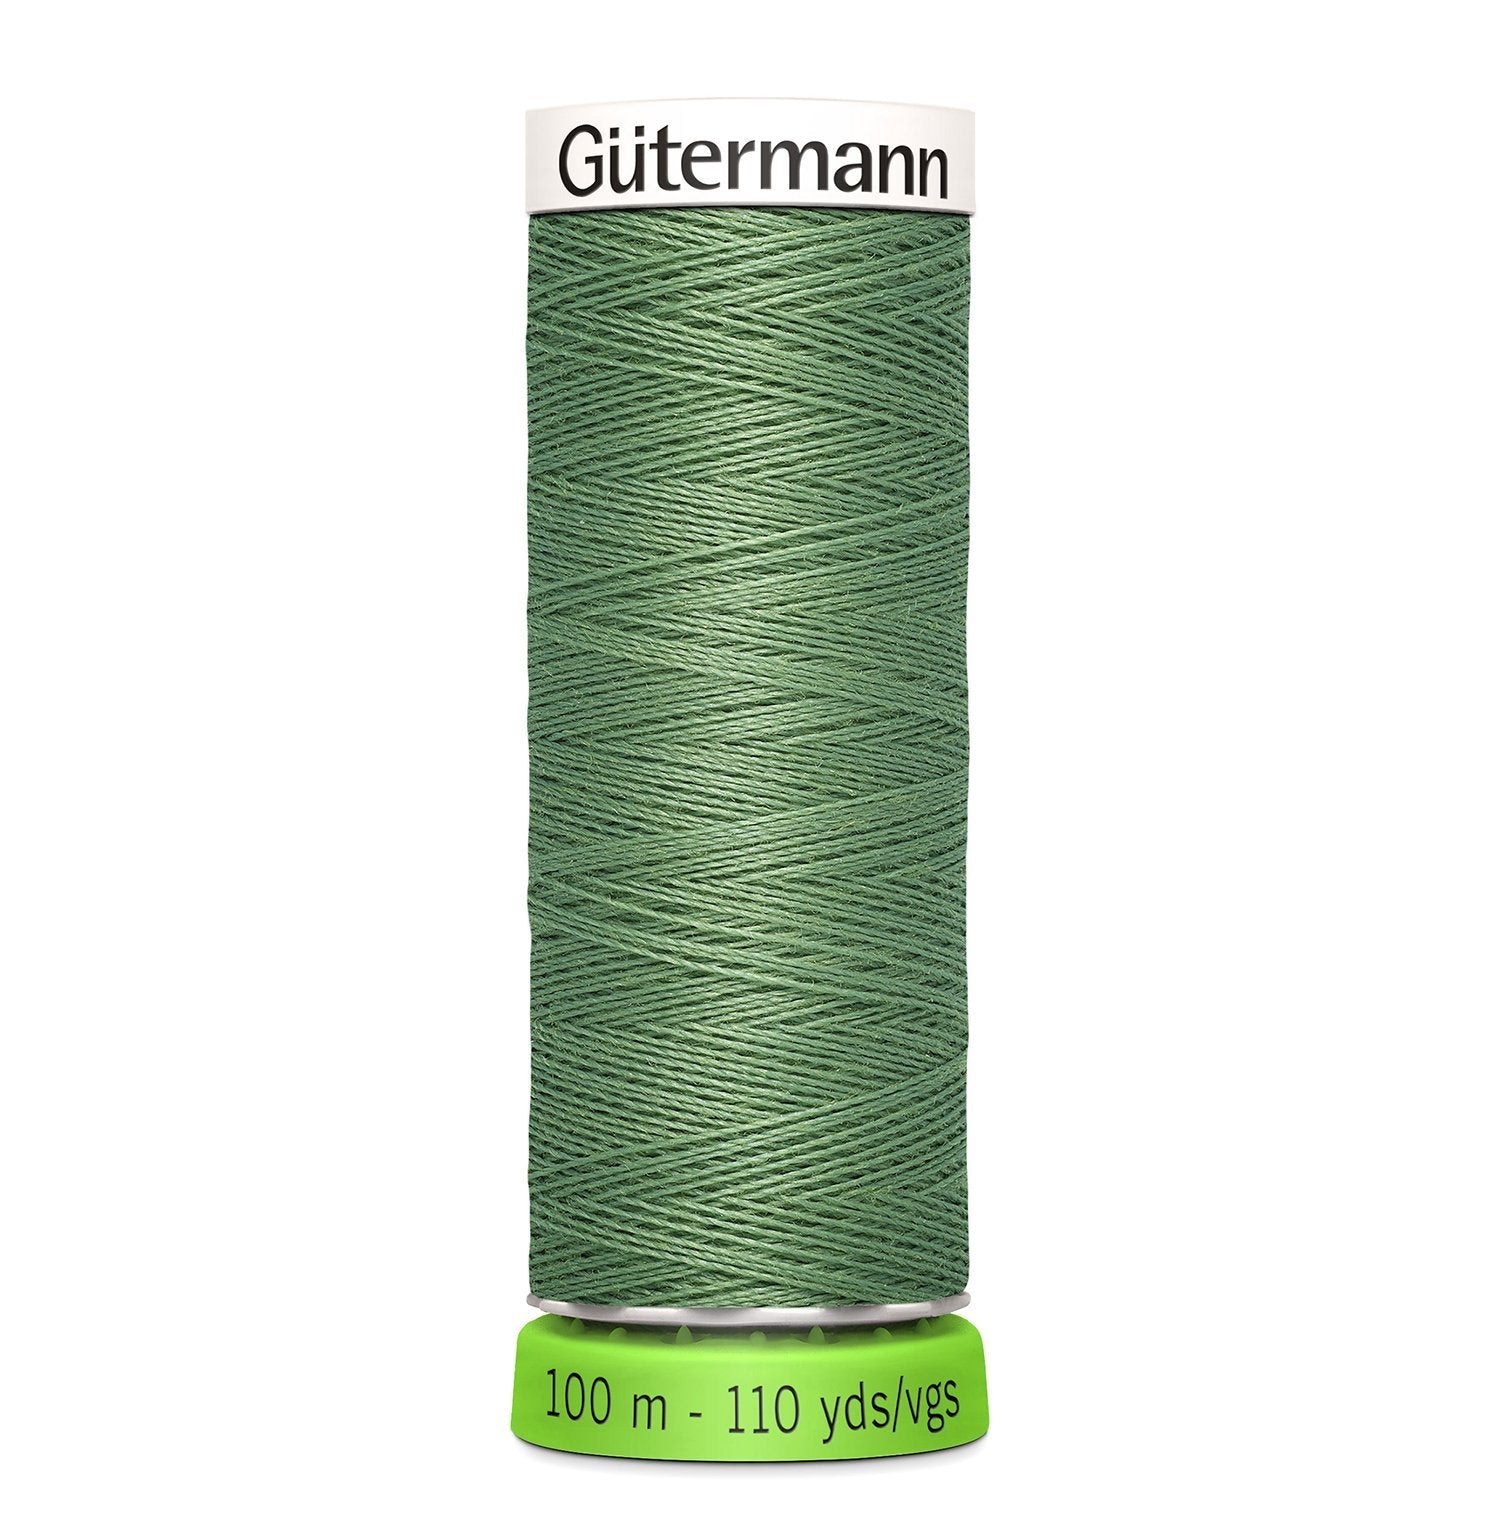 Gutermann Recycled Thread 100m, Colour 821 from Jaycotts Sewing Supplies